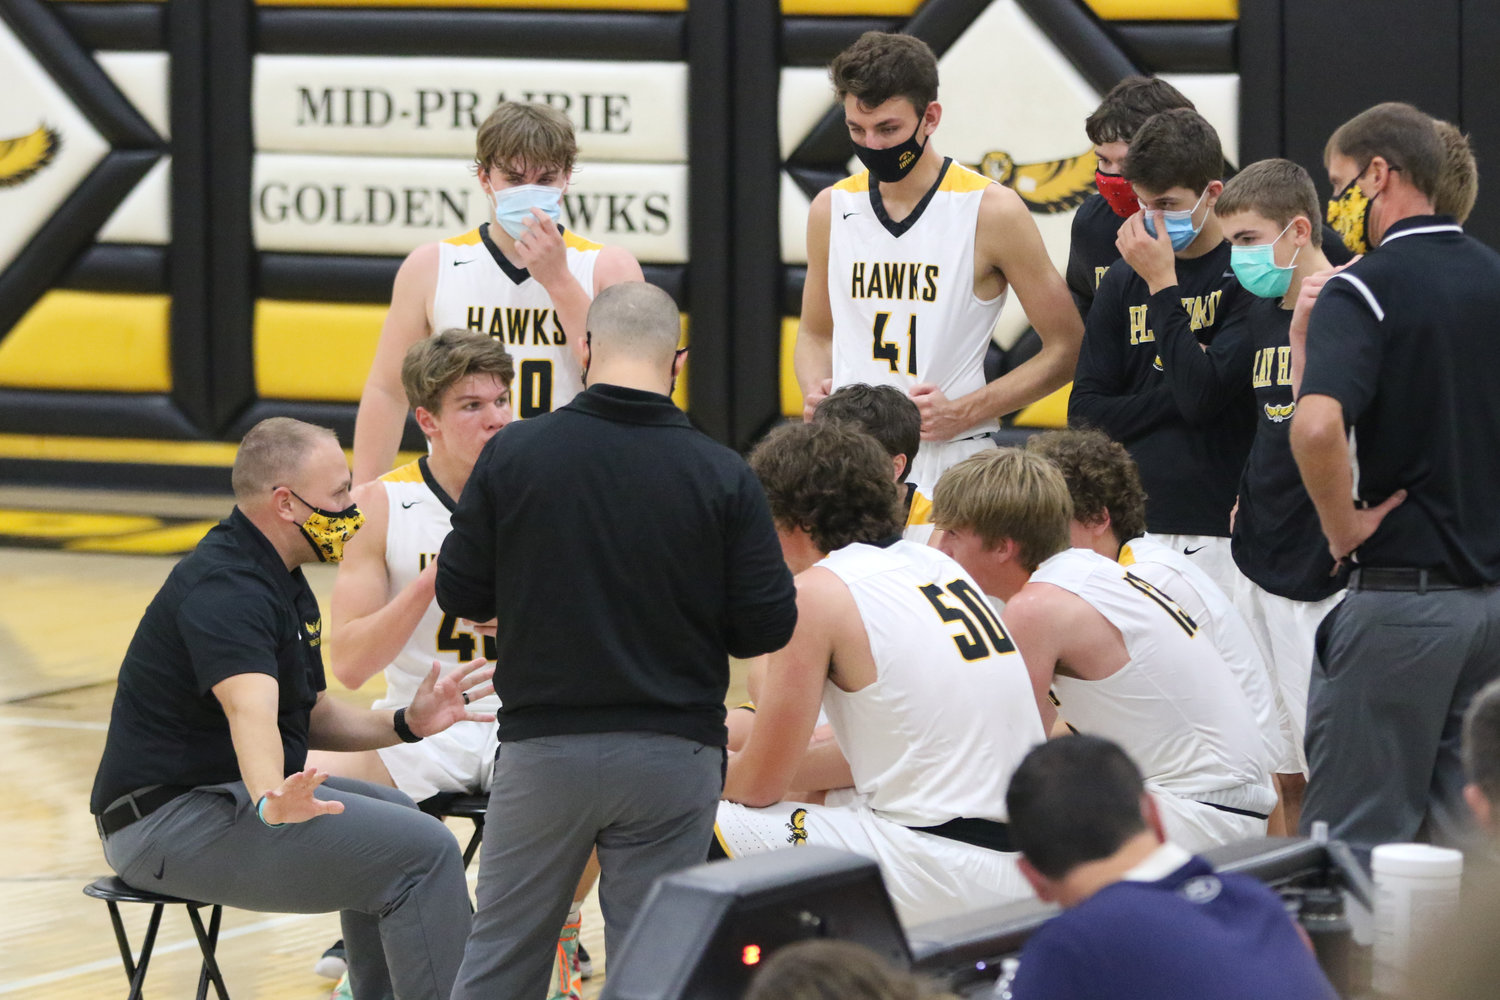 Mid-Prairie coach Daren Lambert (left) addresses his squad after the first quarter of a scrimmage with Mediapolis in Wellman on Saturday, November 21.